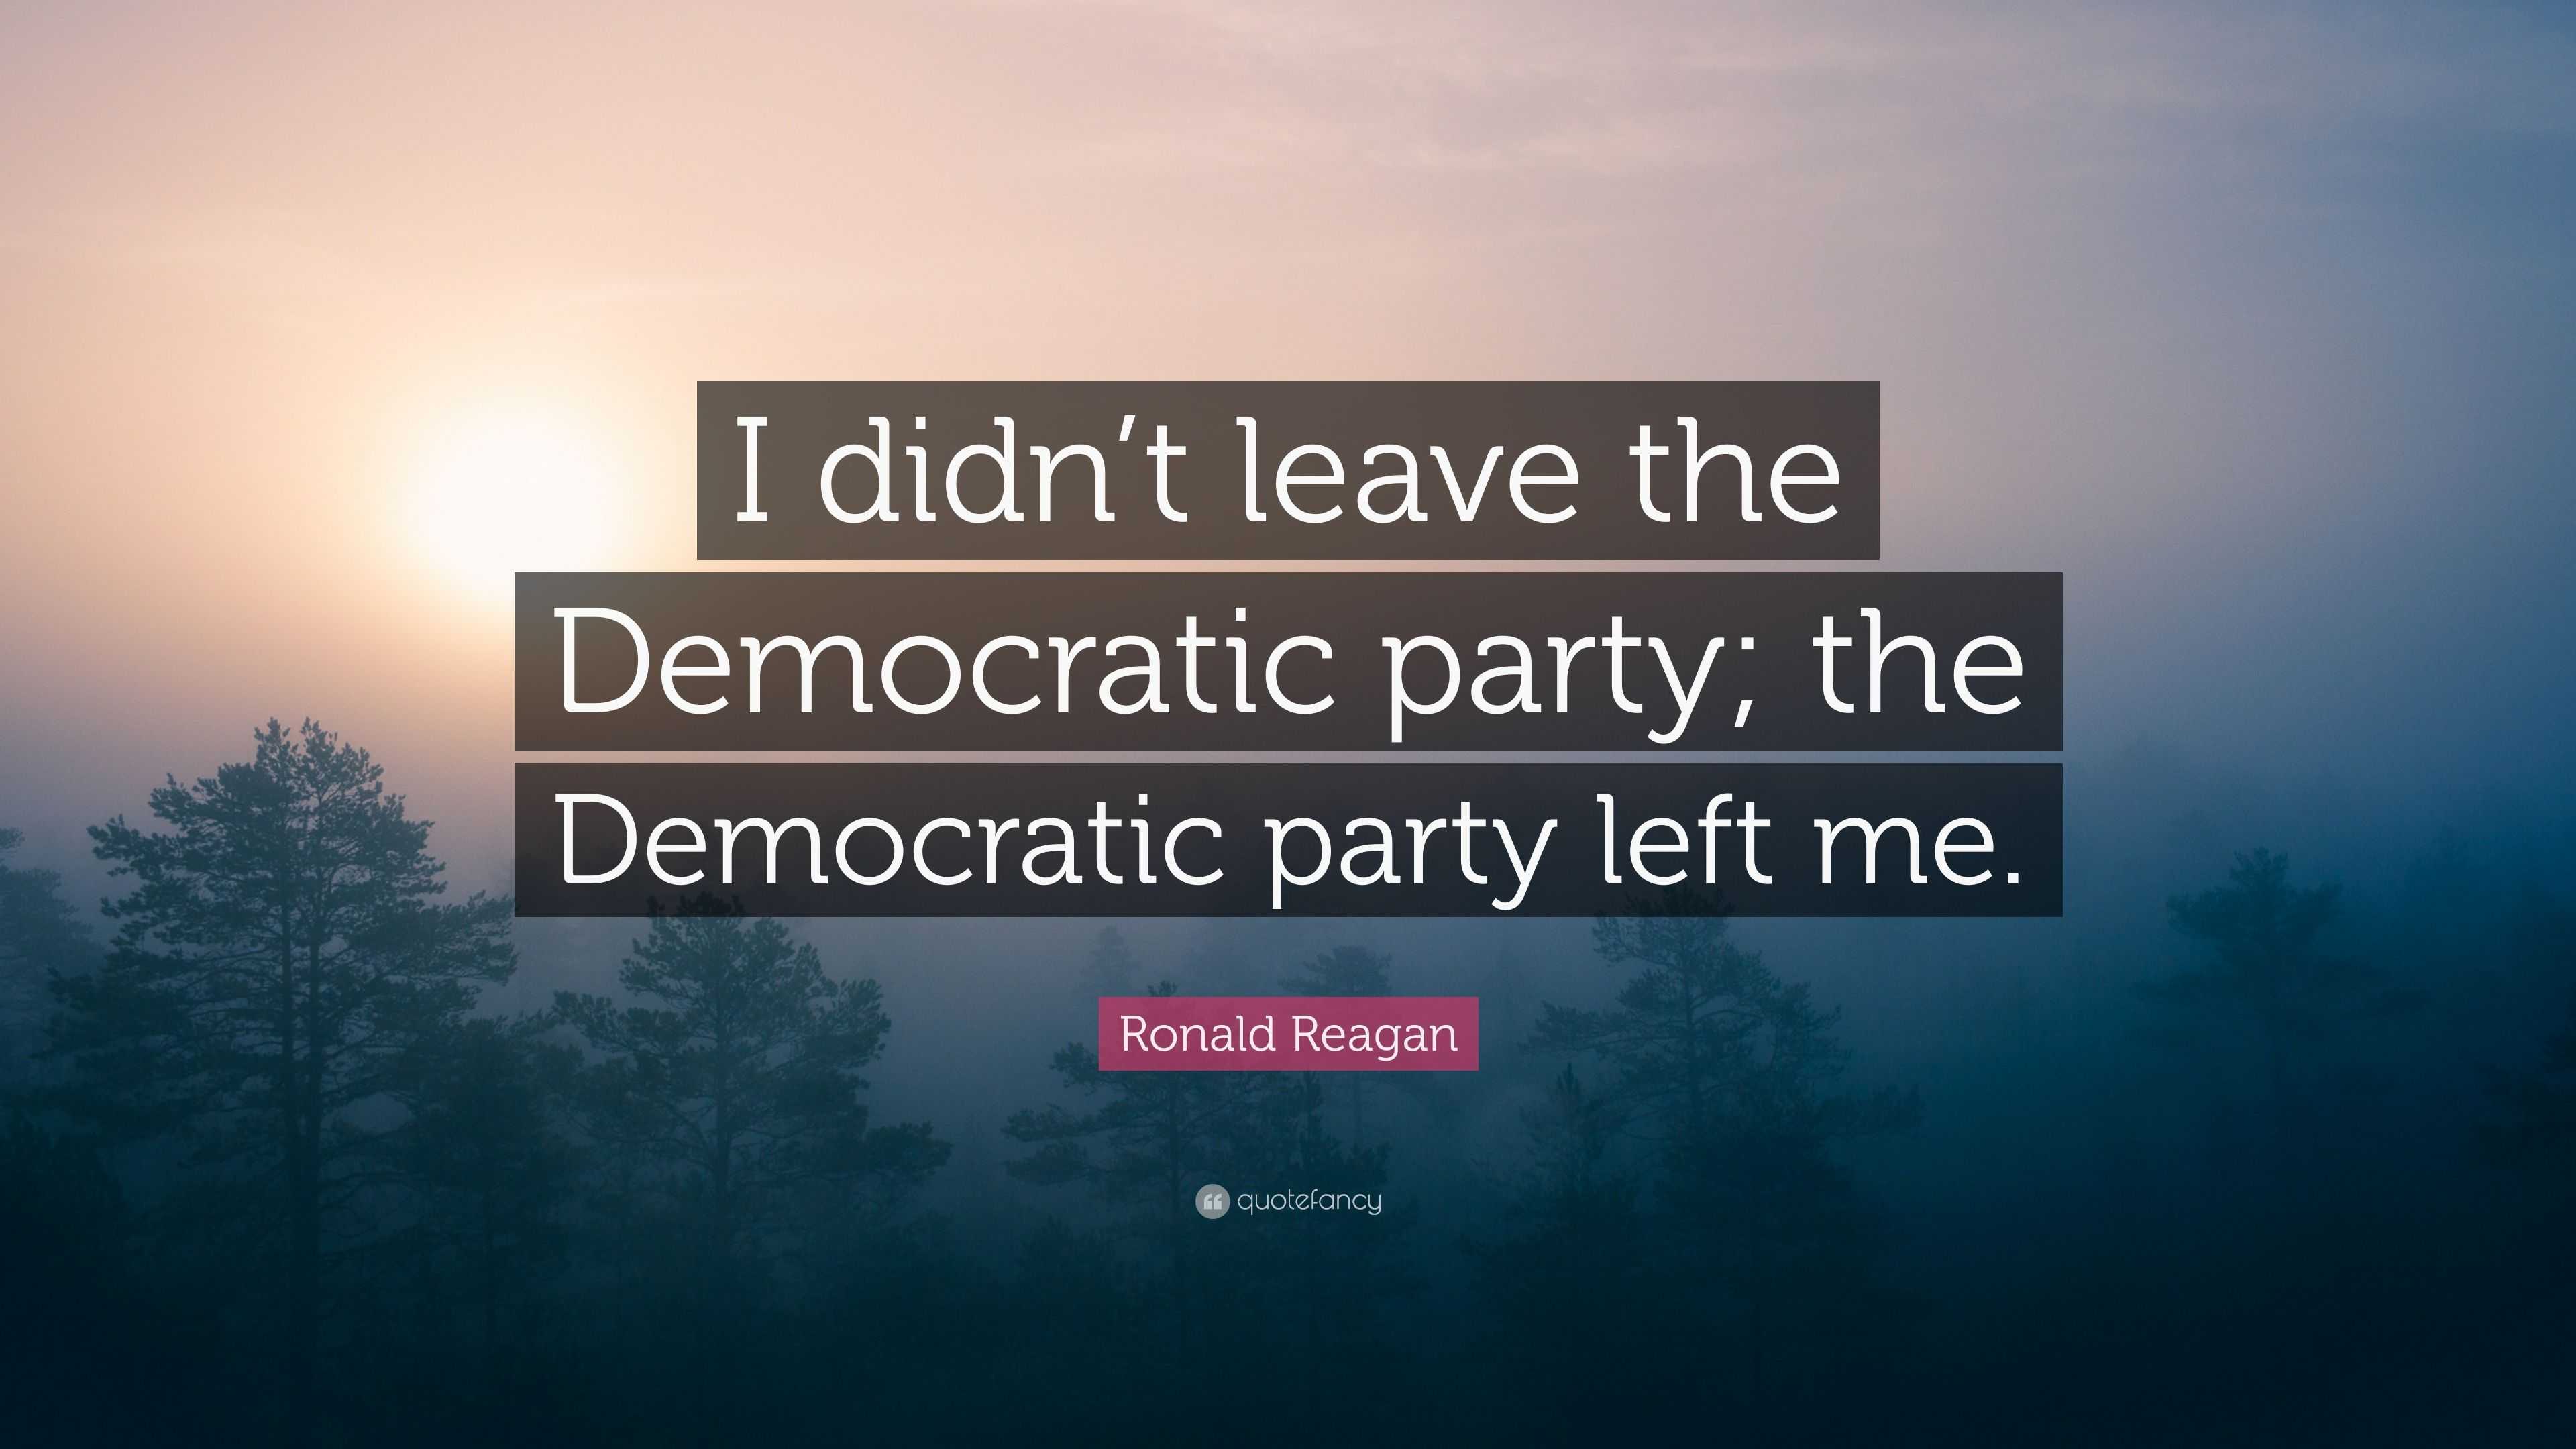 Ronald Reagan Quote “I didn’t leave the Democratic party